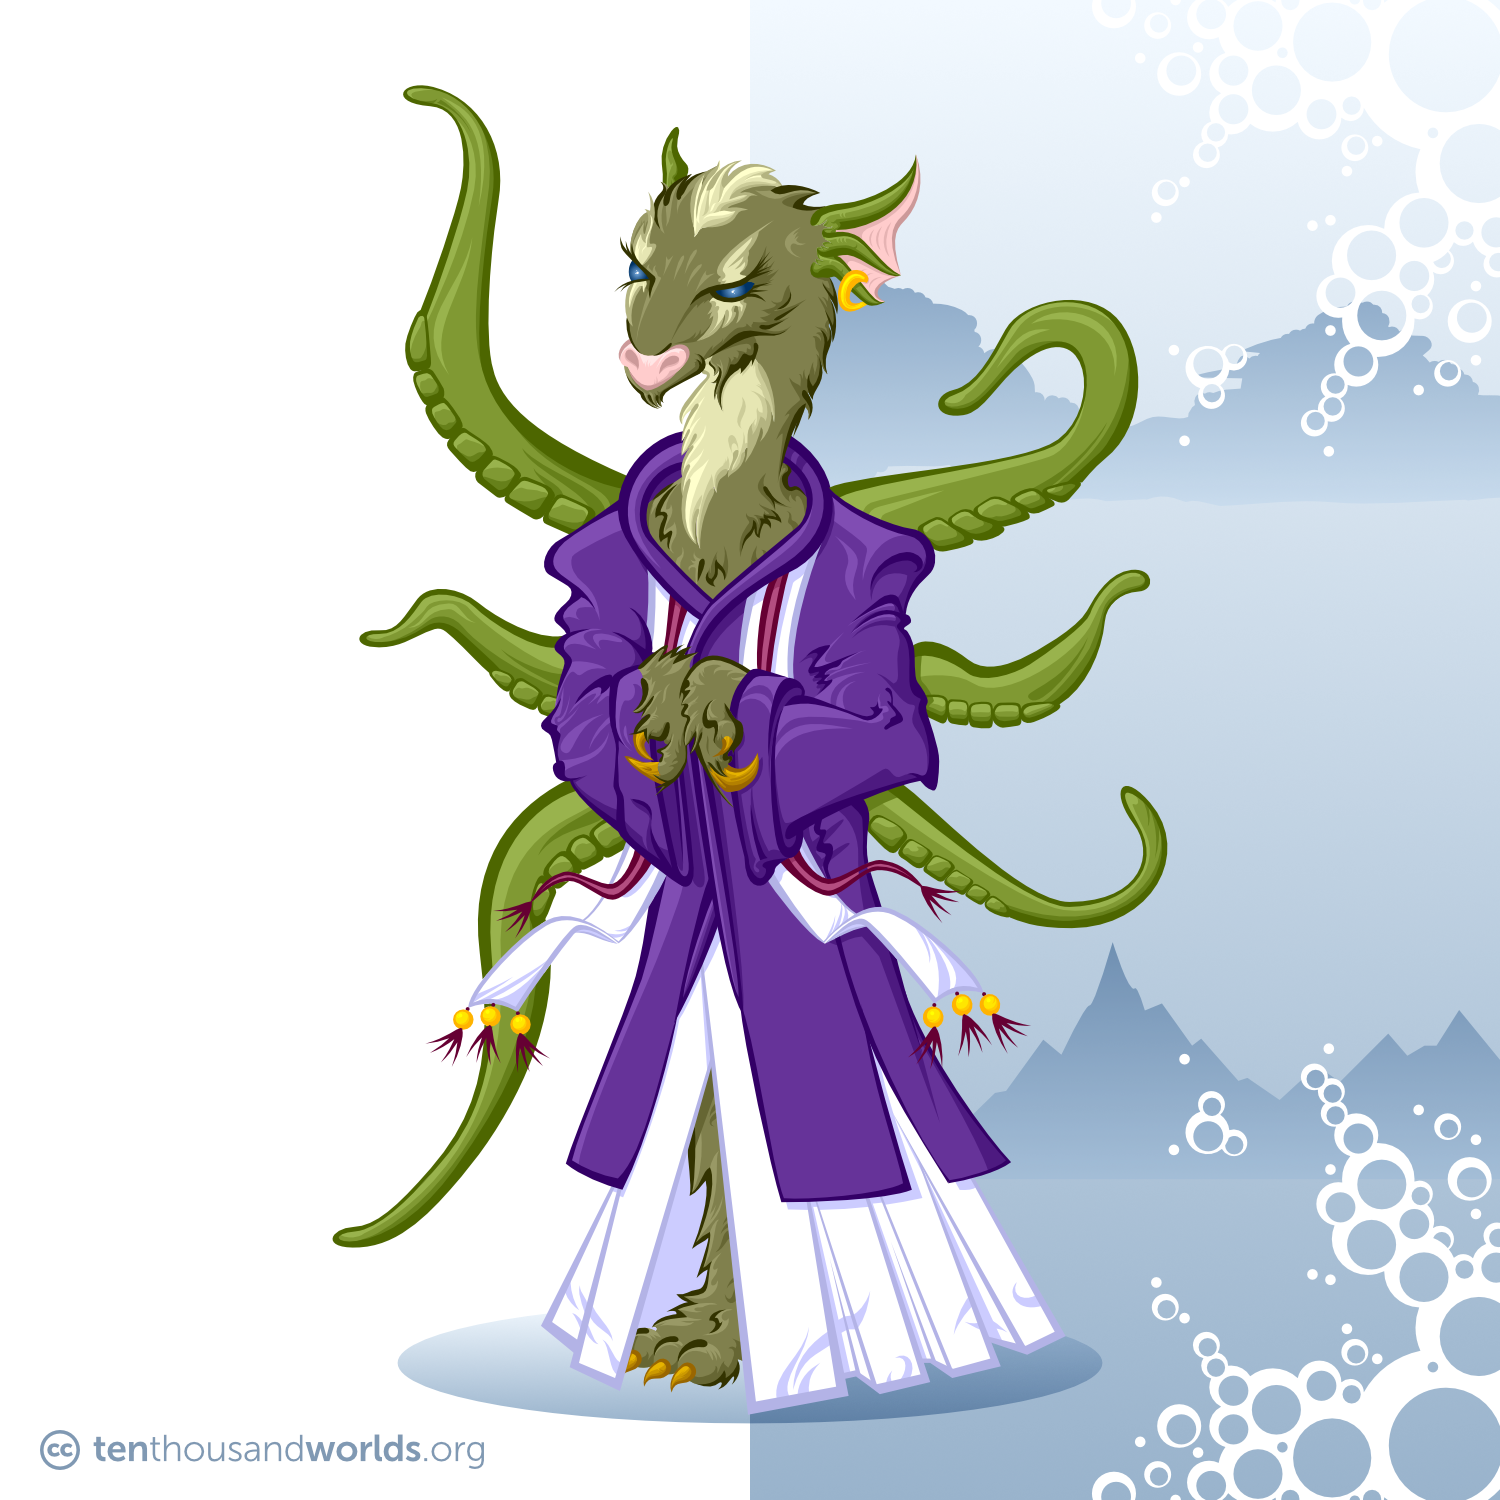 An upright, tan and cream fuzzy being in purple and white robes and gold-tasseled scarves, with an antelope-like head and neck, long lashes around cobalt-blue eyes, large frilled reptilian ears, backward-curving fore-paws, and six green tentacles coming out of its back.